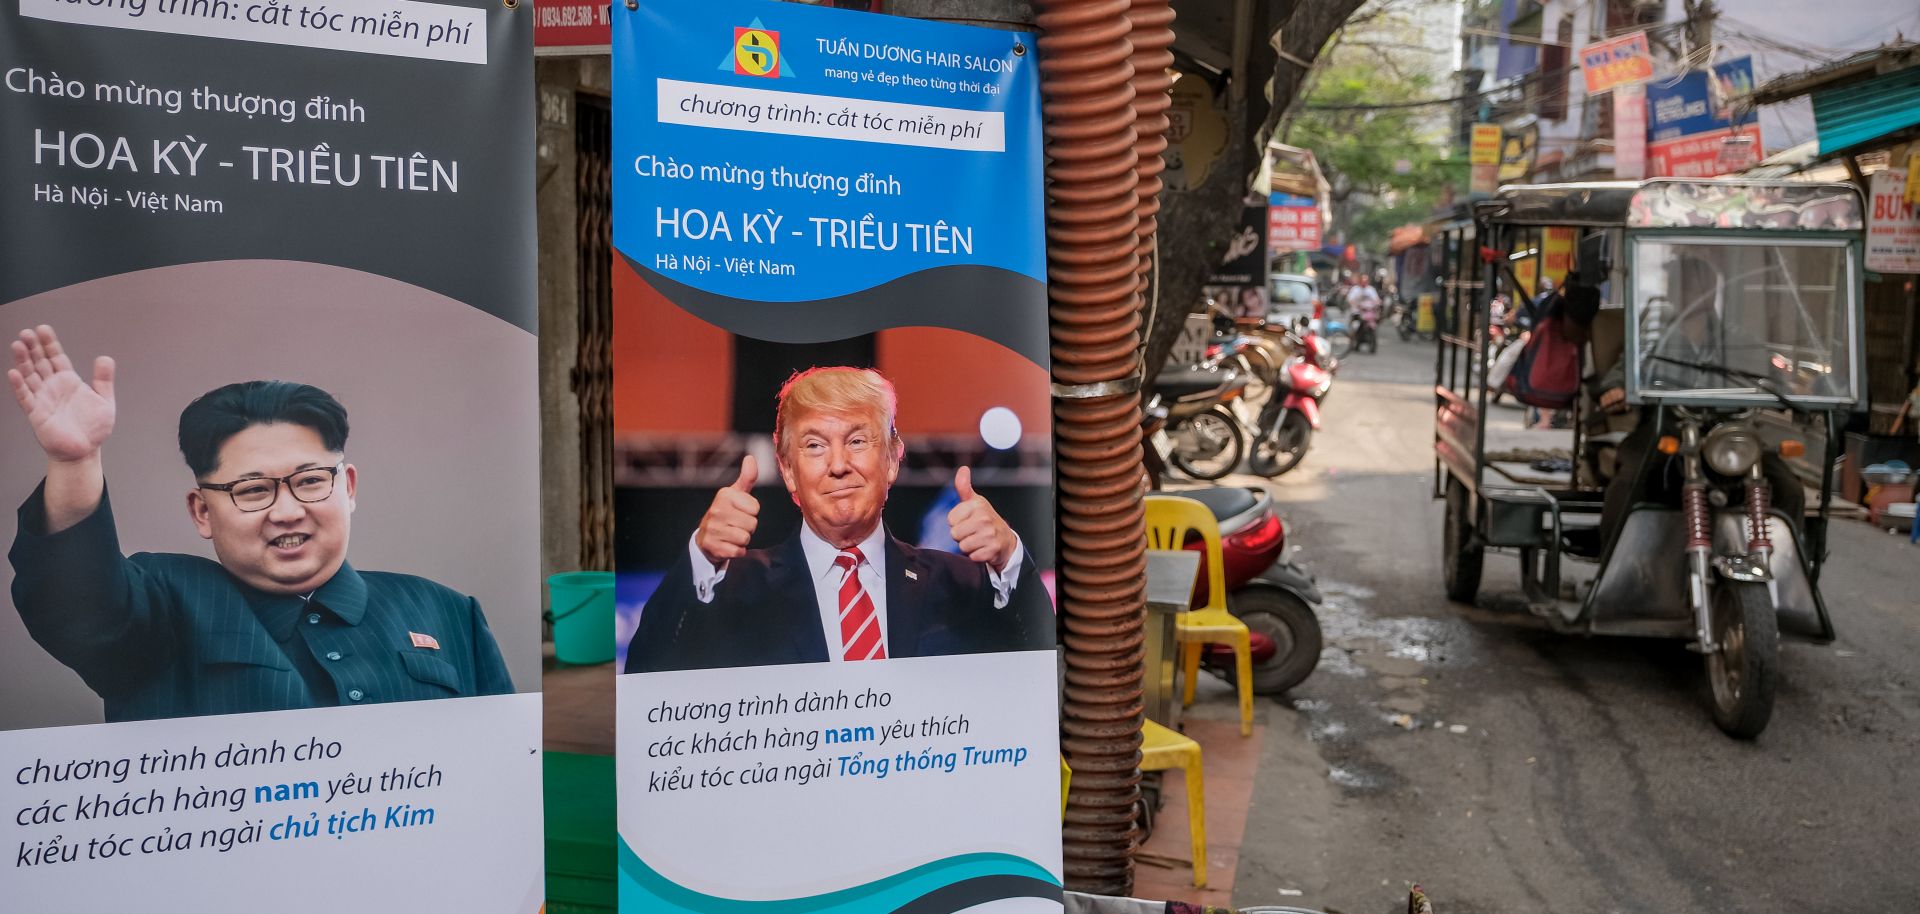 A beauty academy in Hanoi, Vietnam, offers free haircuts to anyone who wants to copy the hairstyle of U.S. President Donald Trump or North Korean leader Kim Jong Un, on Feb. 20, 2019.